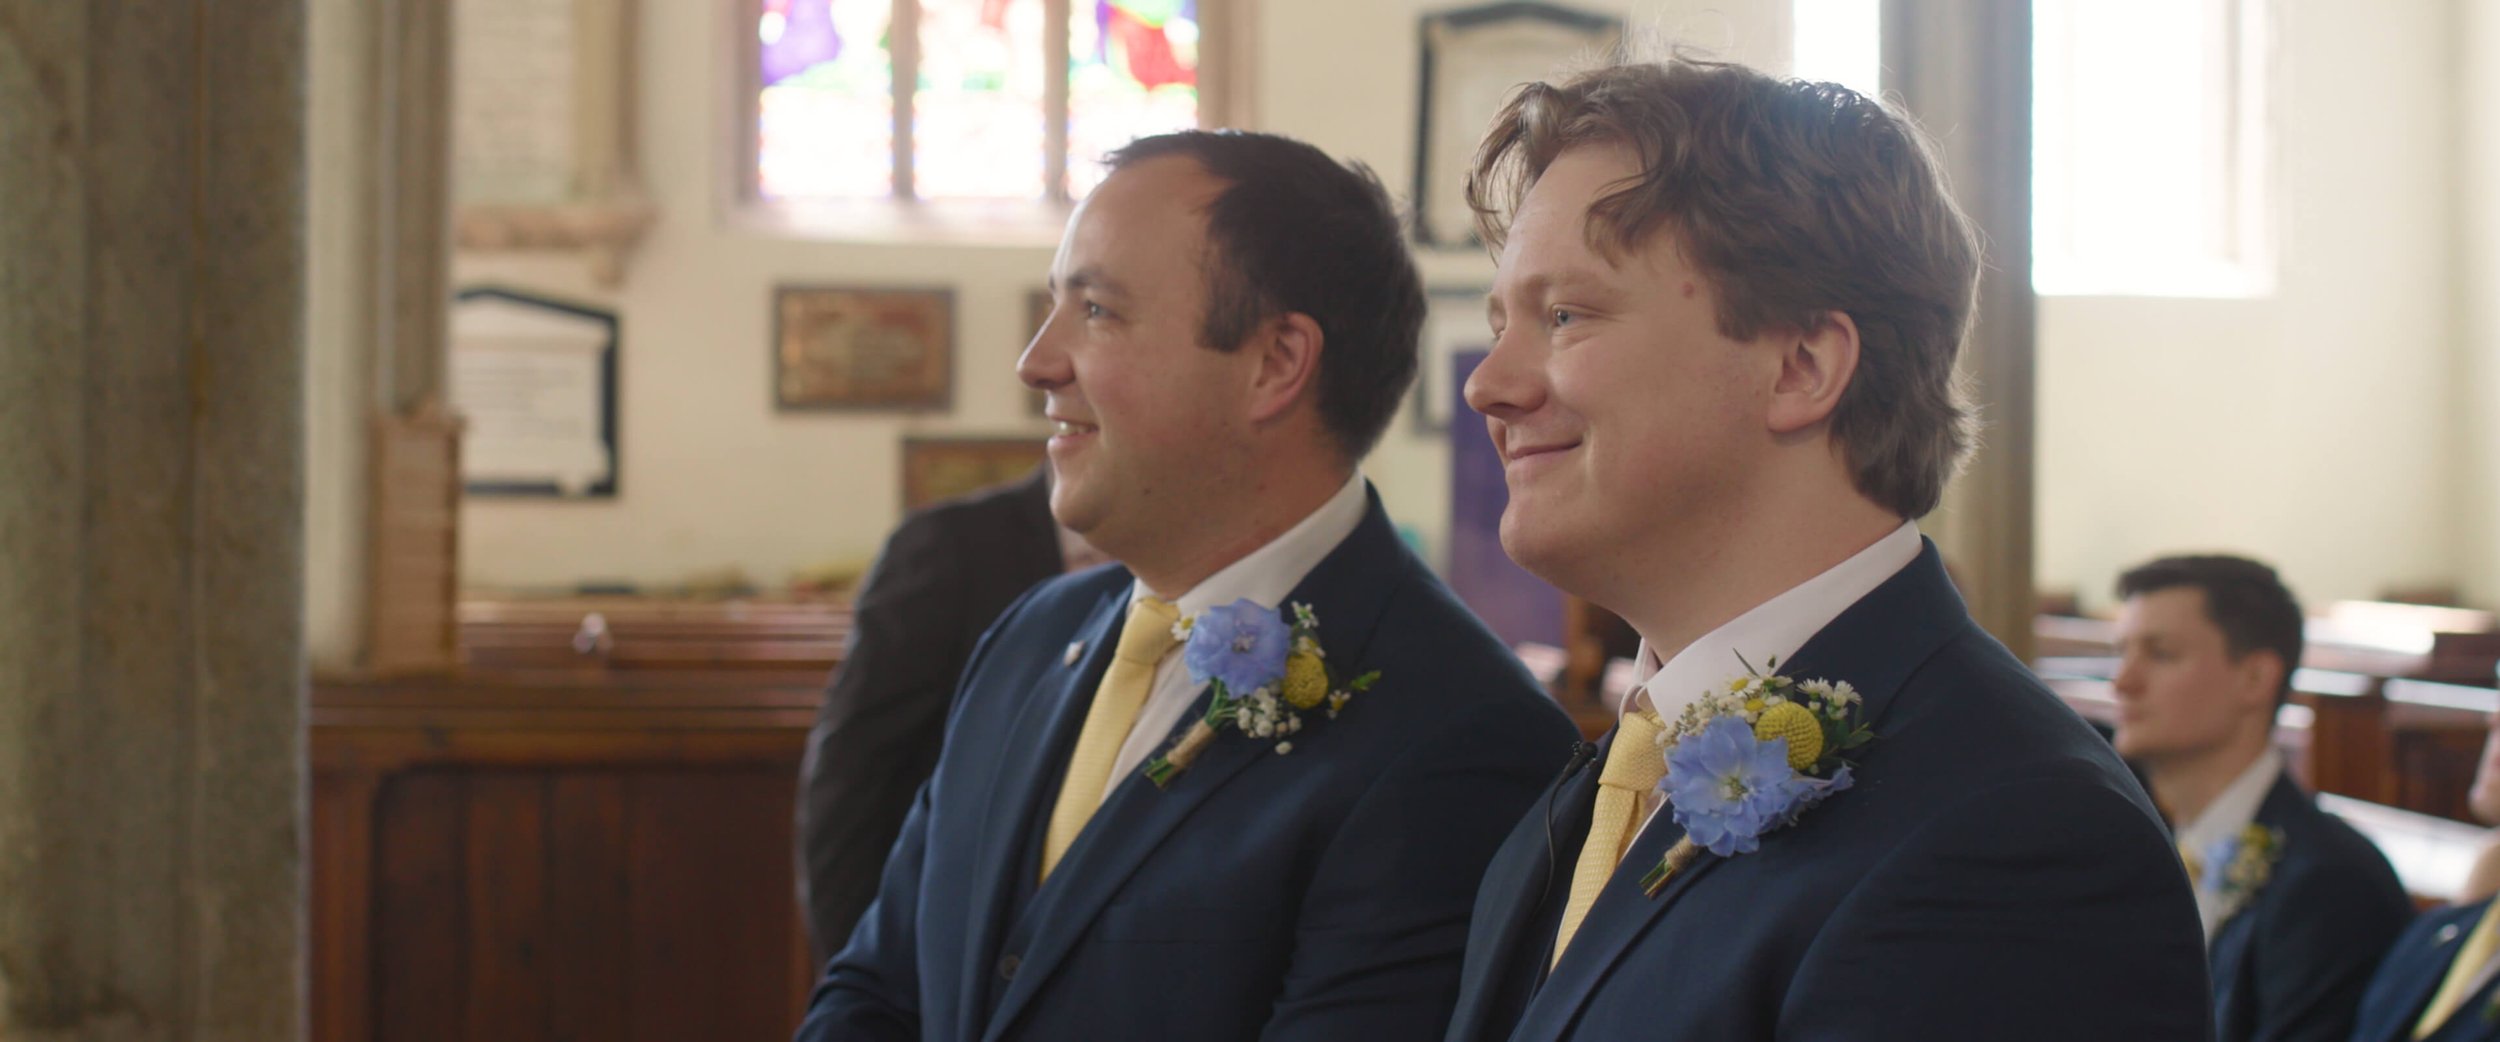 Dael smiles nervously next to best man whilst waiting for the bride to arrive at church